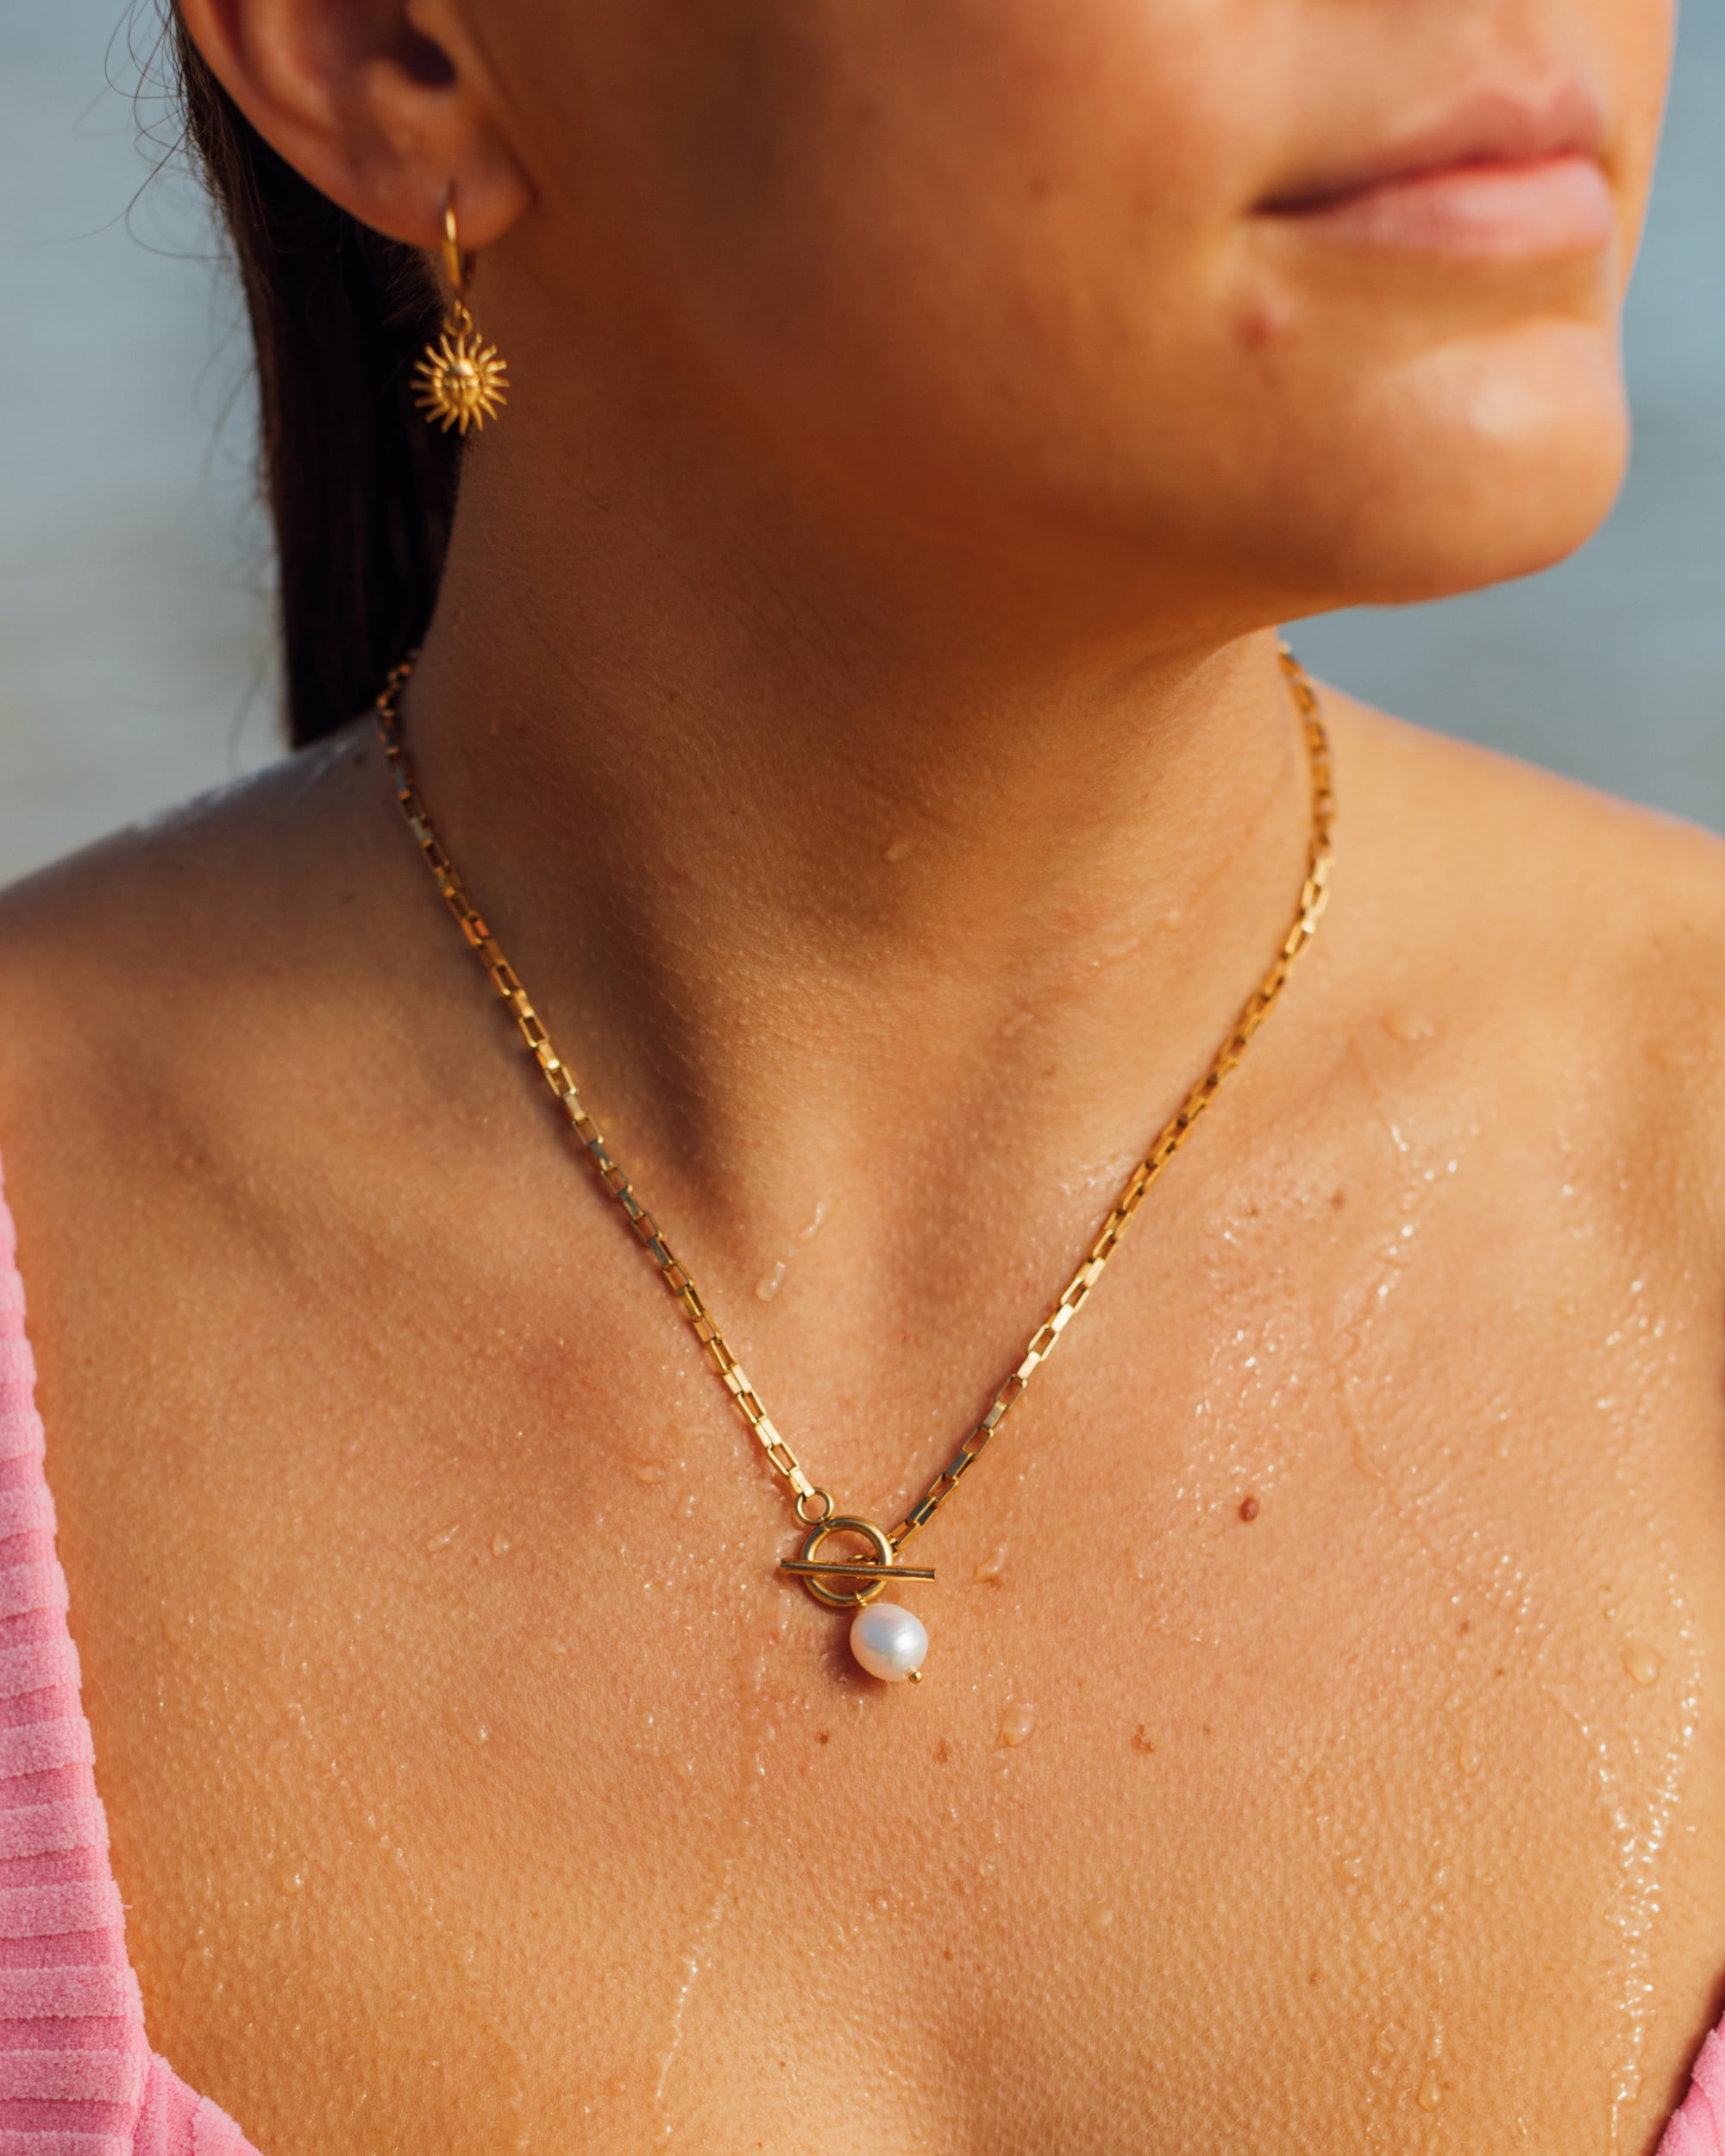 The Beautifully Flawed Necklace